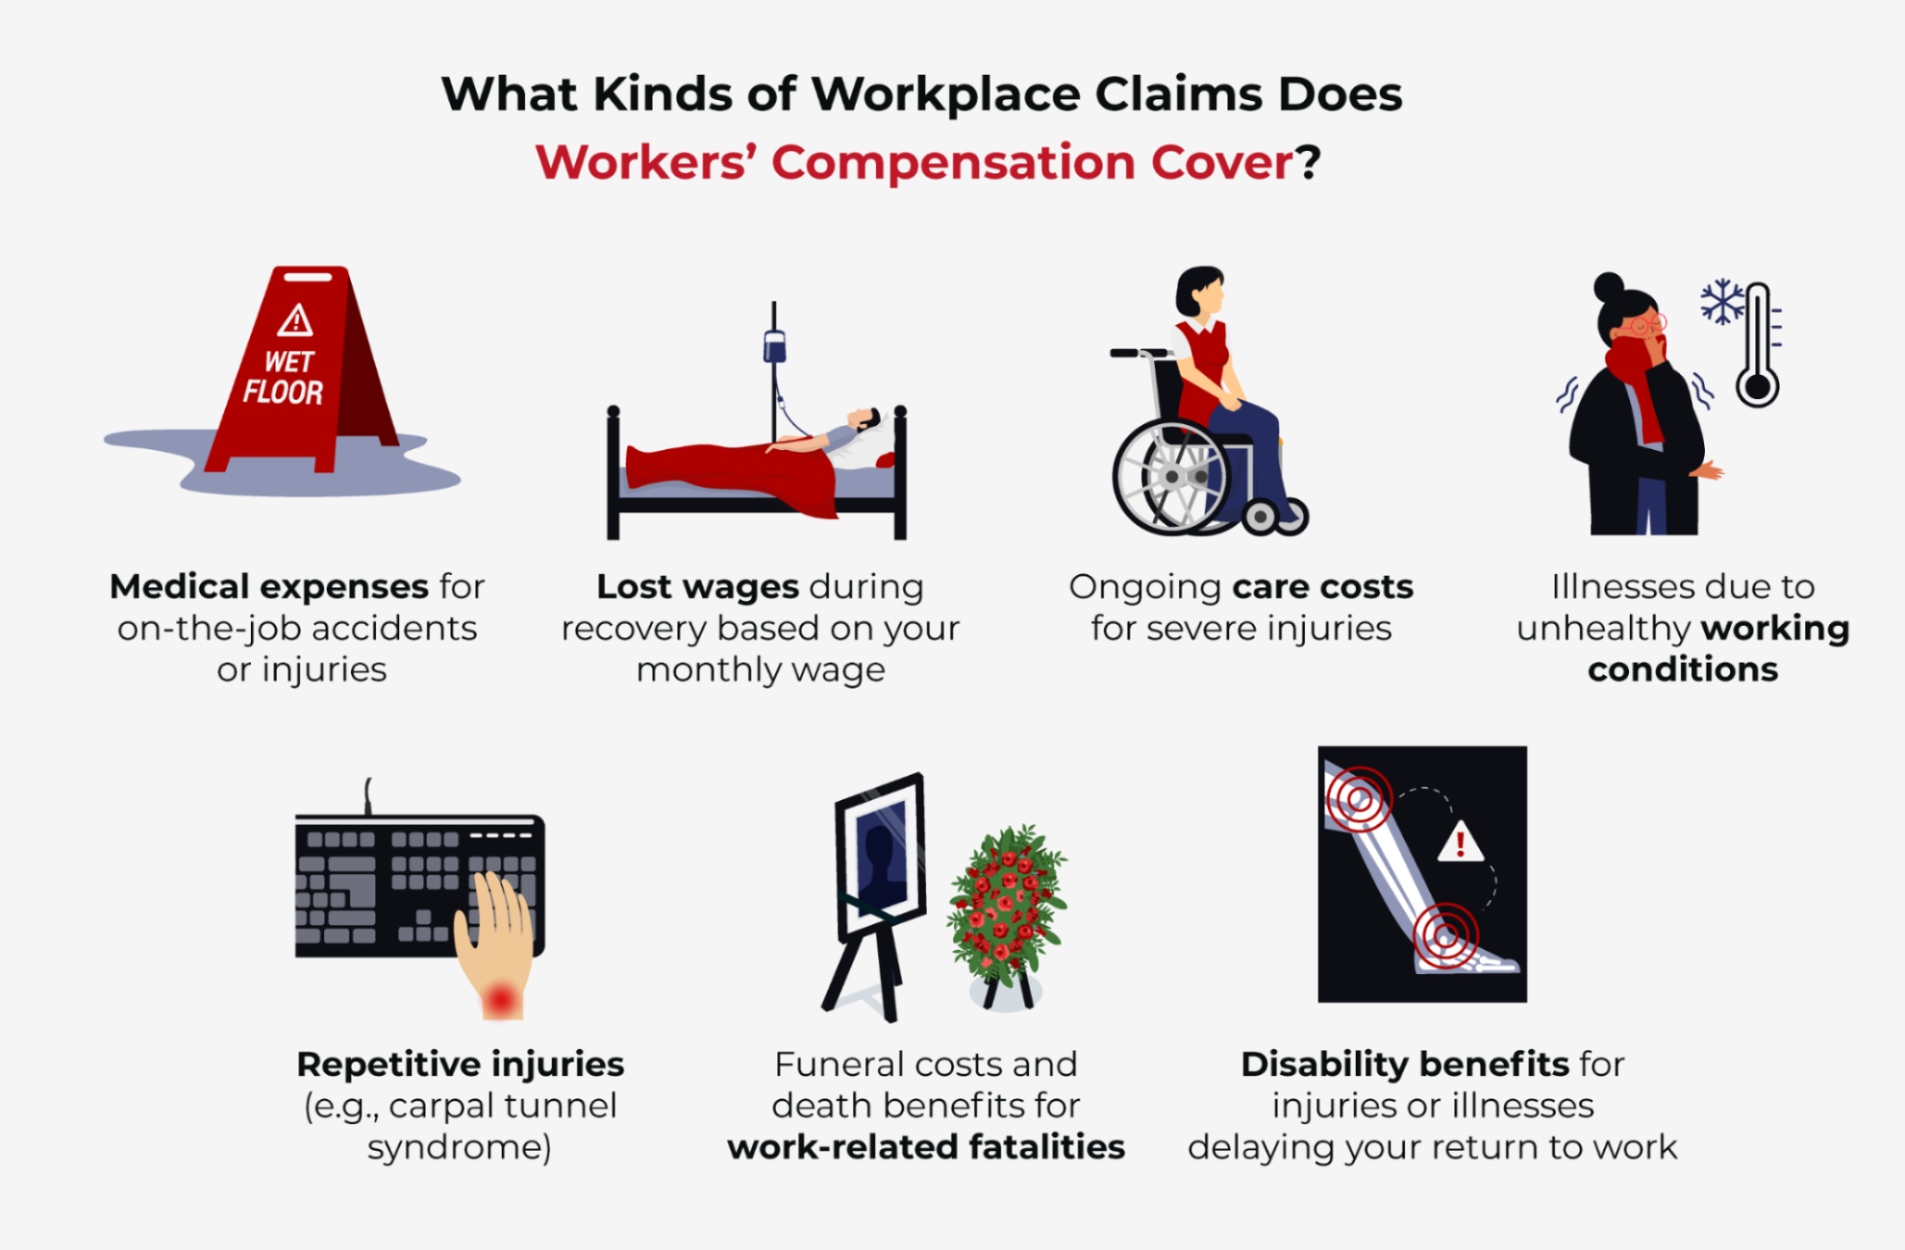 what kinds of workplace claims does workers' compensation cover?